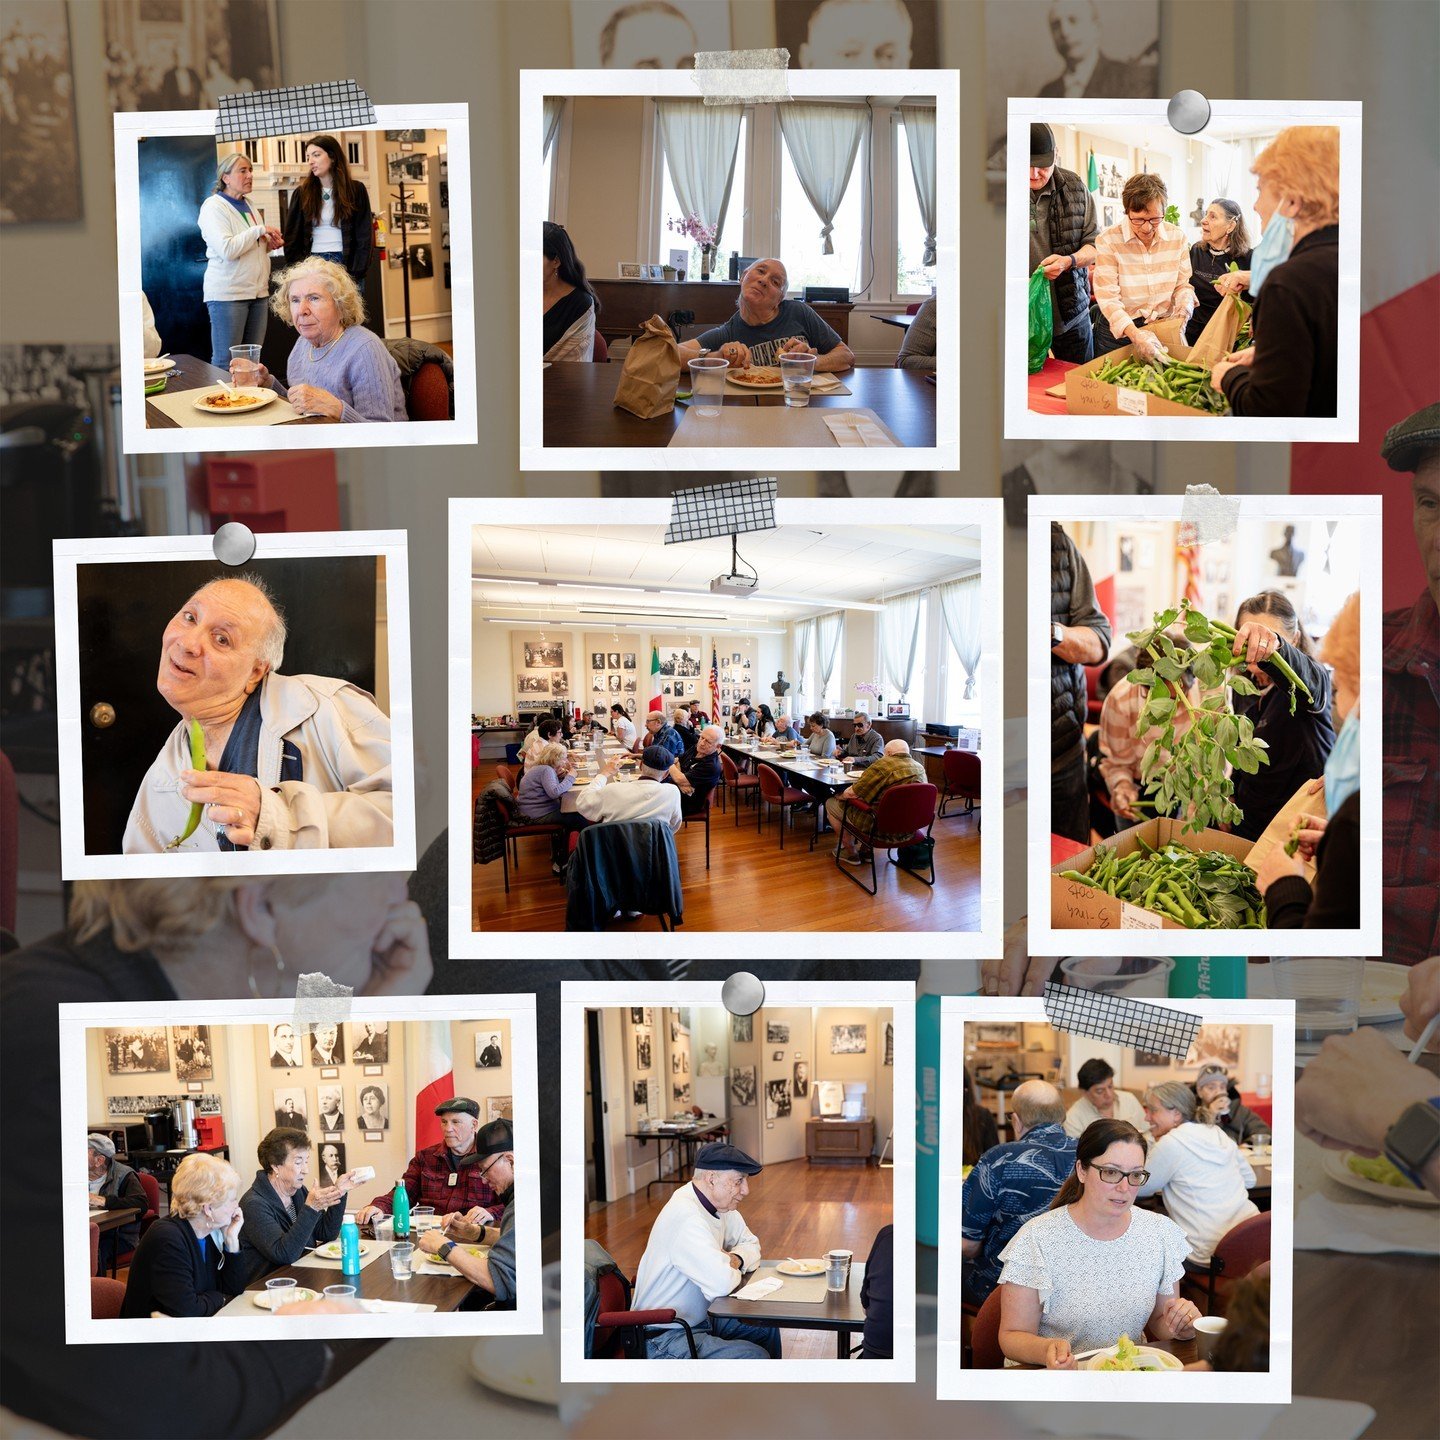 Every Wednesday at Casa Fugazi, we host our Italian luncheon! It's a delightful opportunity for our community  to gather and enjoy a traditional Italian lunch together. Come share great food and wonderful company with us next week! Just RSVP on Monda